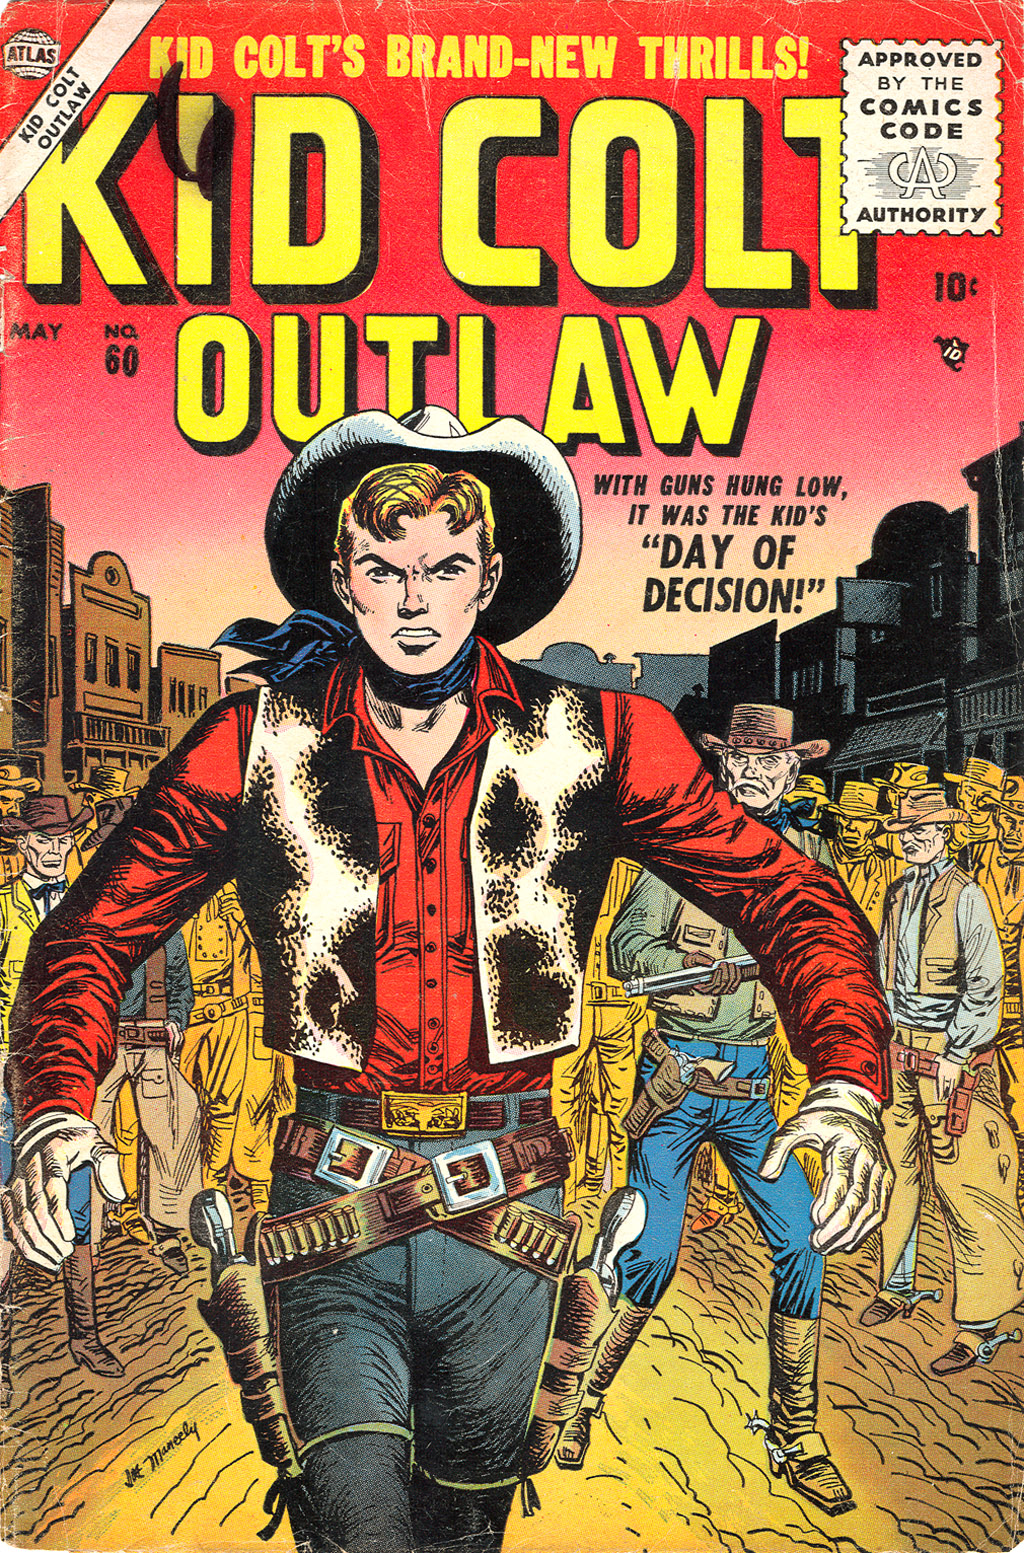 Read online Kid Colt Outlaw comic -  Issue #60 - 1